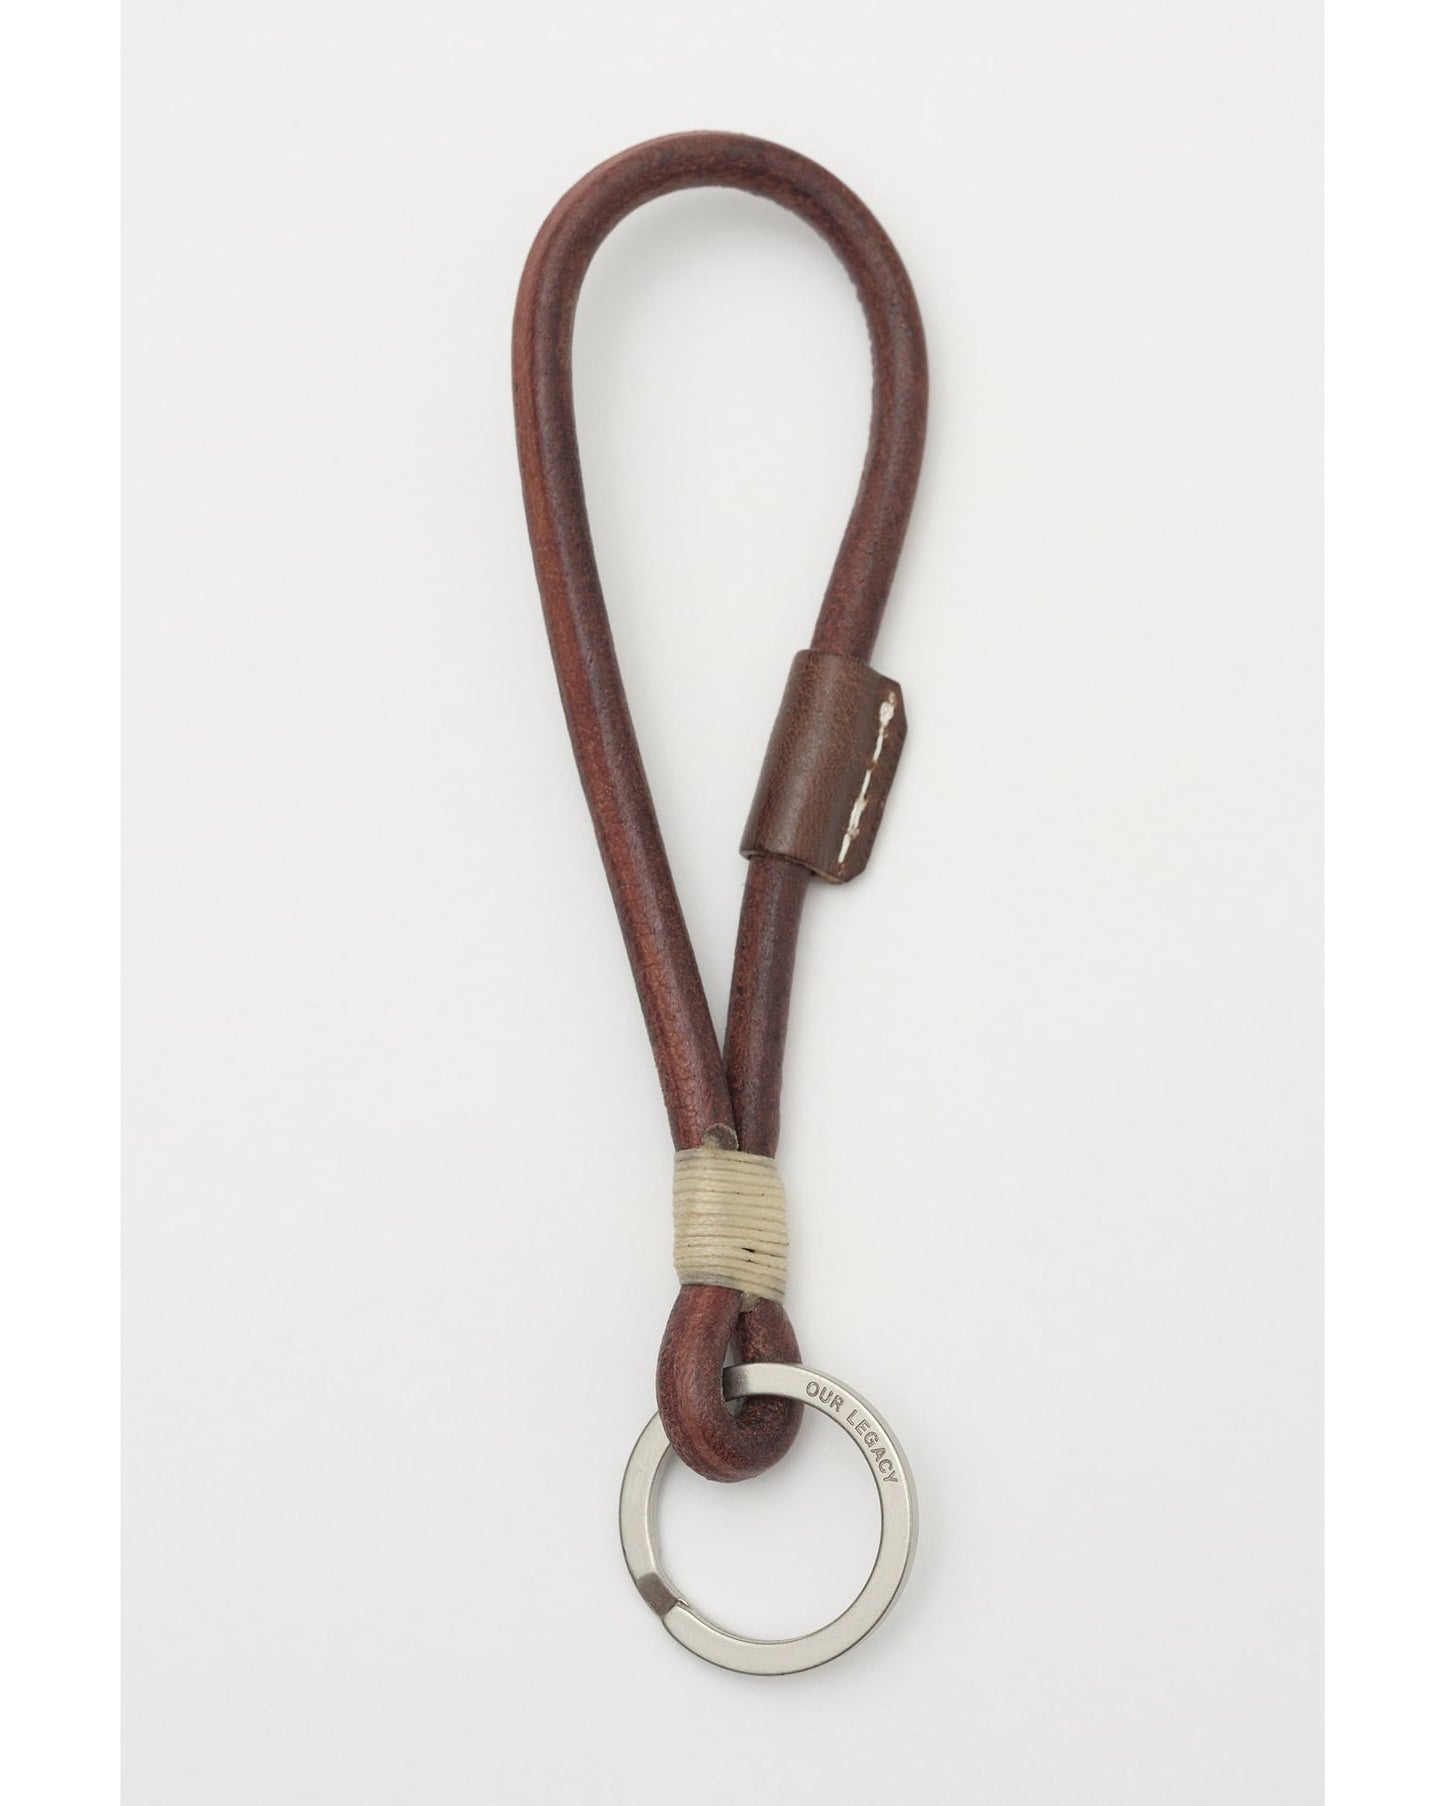 KNOT KEY HOLDER BROWN LEATHER